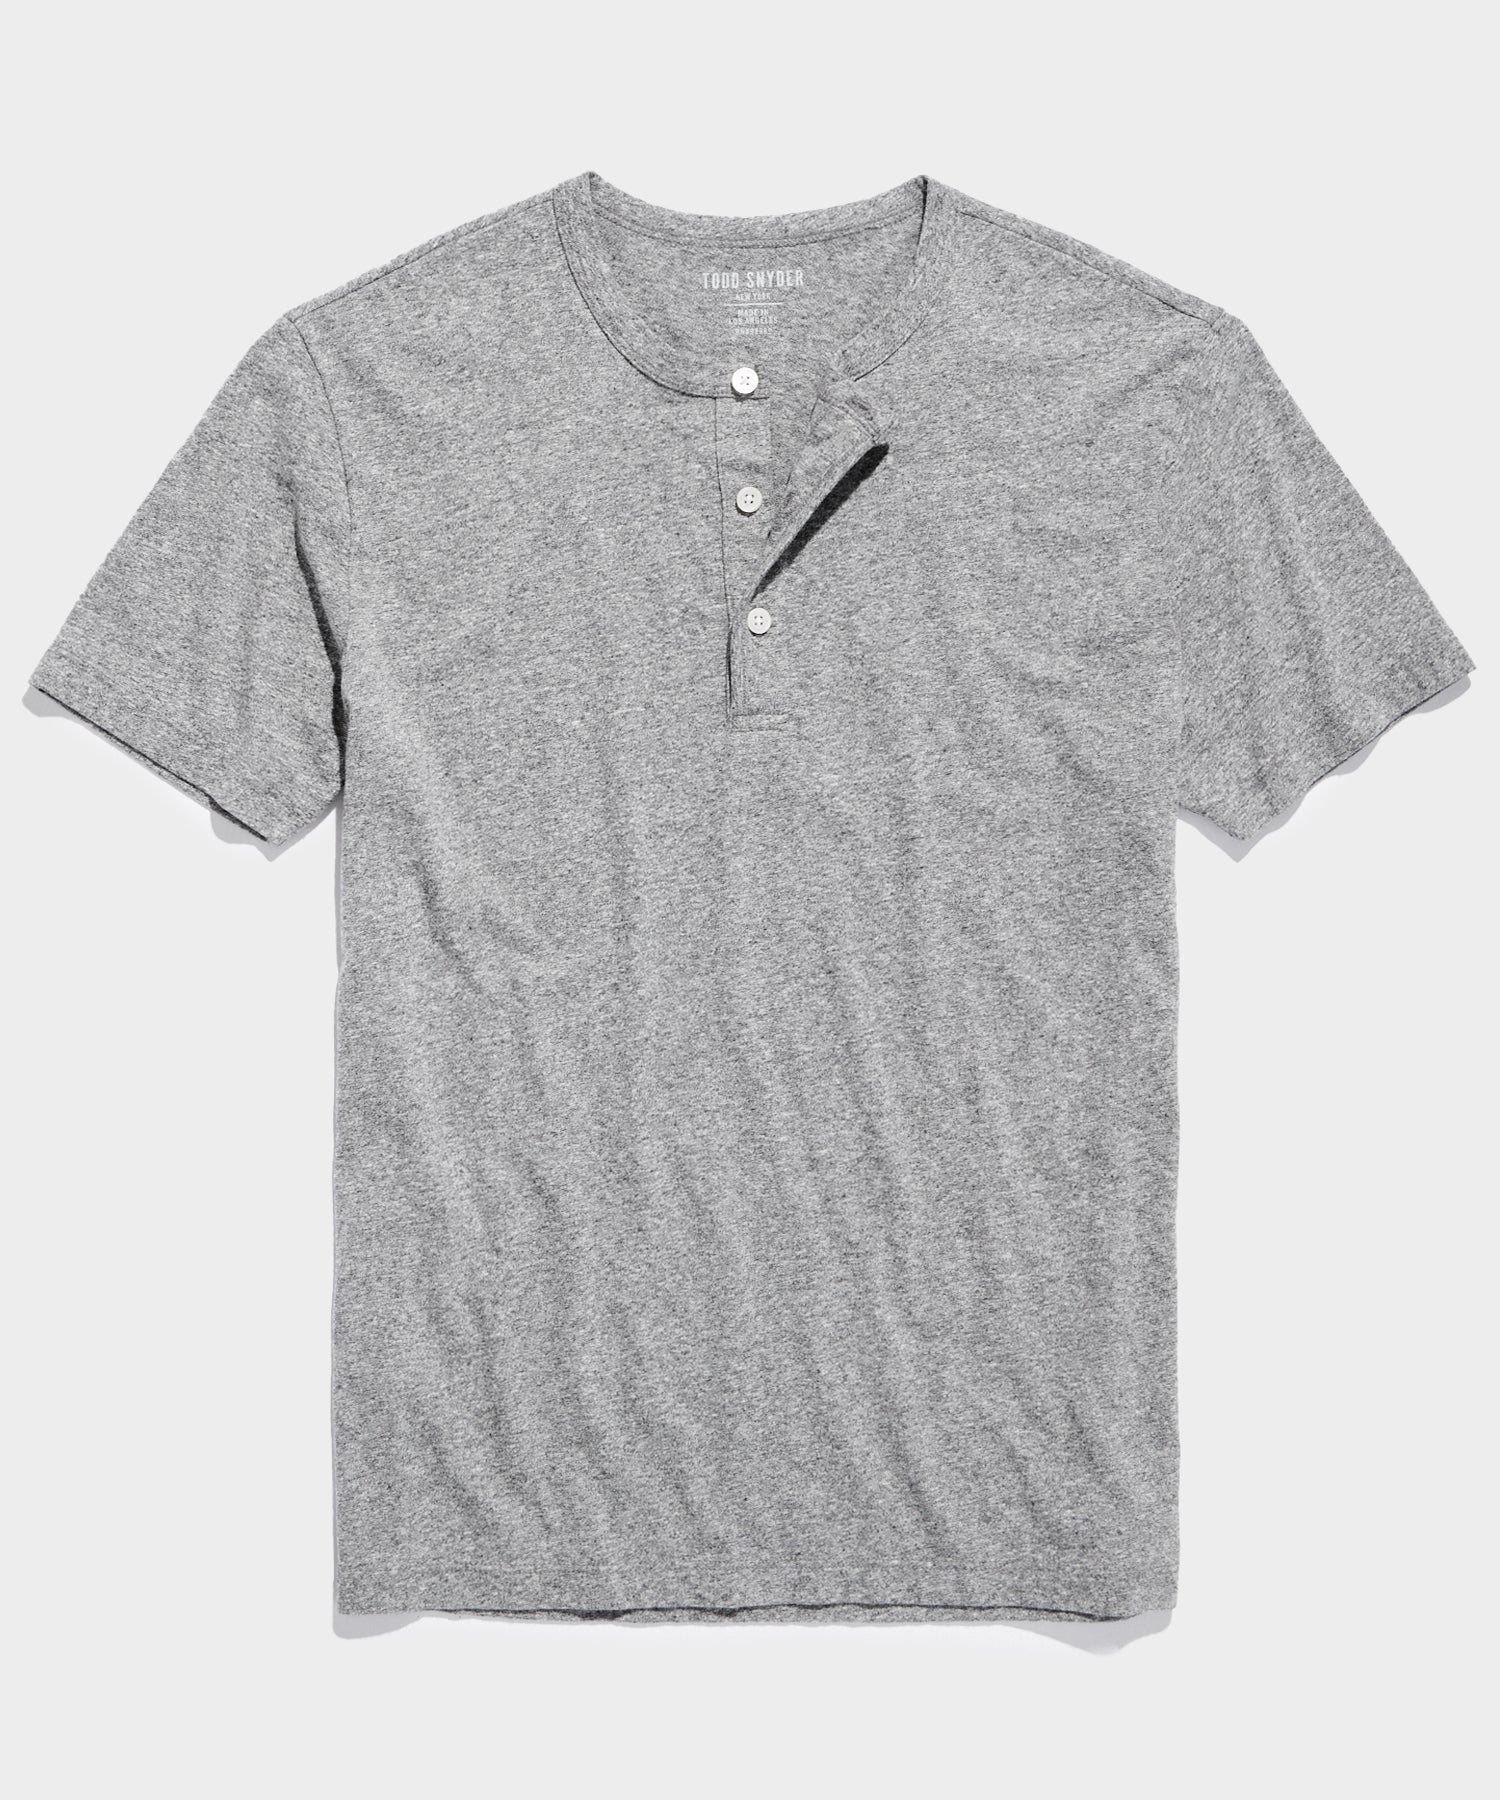 MADE IN L.A. SHORT SLEEVE JERSEY HENLEY in Grey Heather